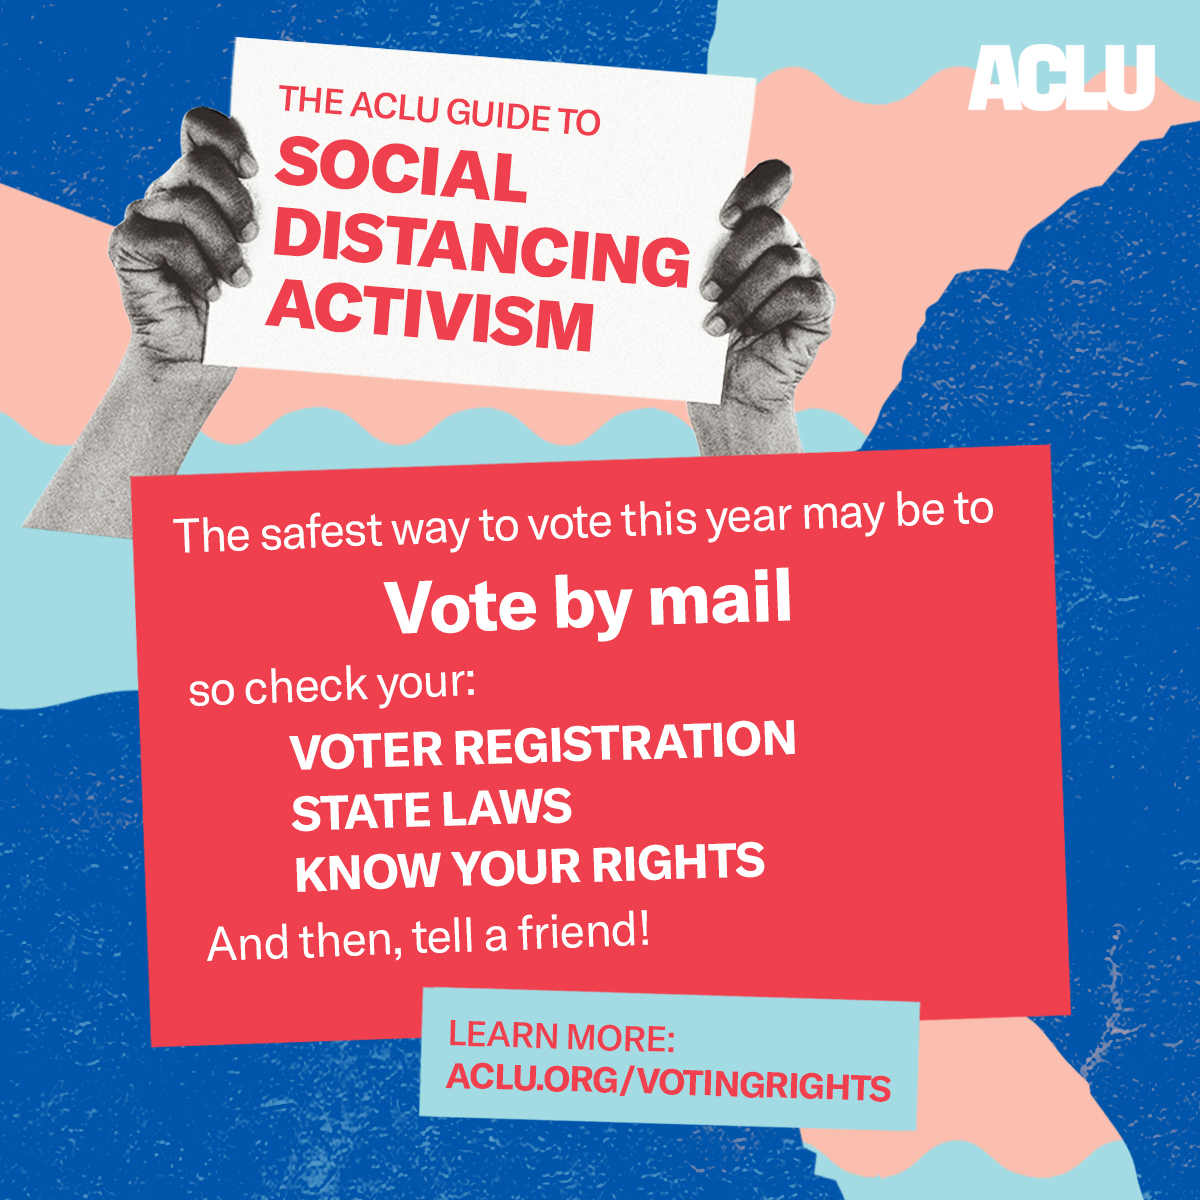 A graphic image that shows hands holding a sign that says "social distancing activism" and "Vote by mail"